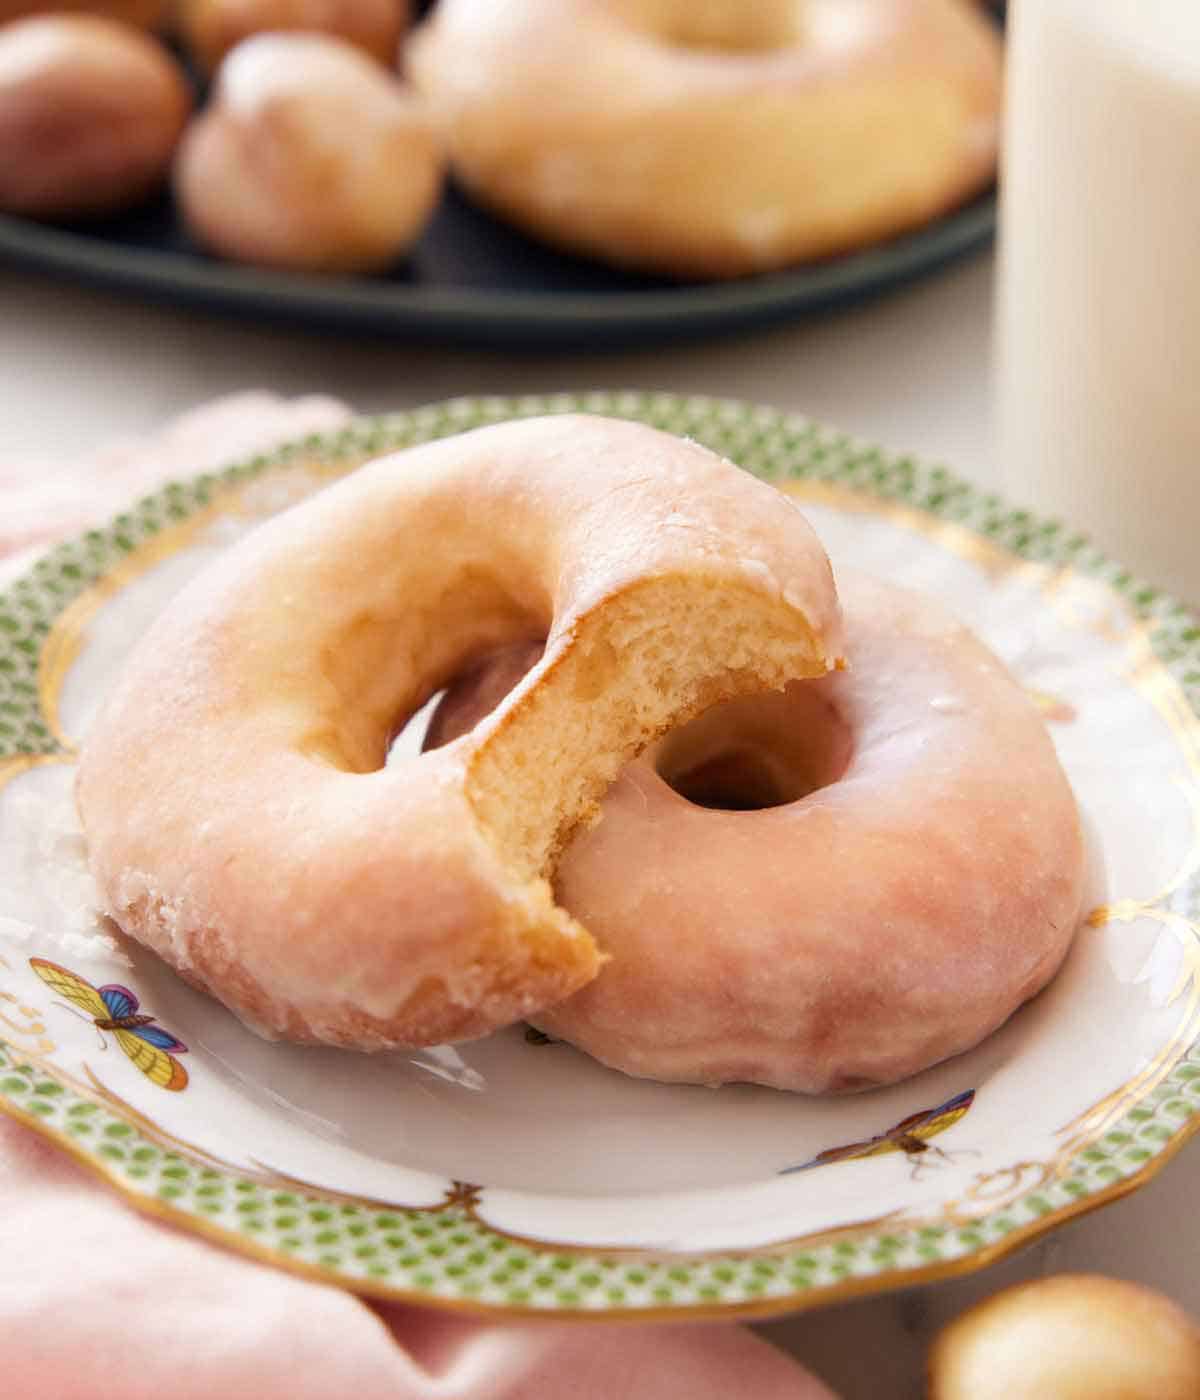 A plate with a glazed air fryer donut with a second stacked on top with a bite taken out of it.